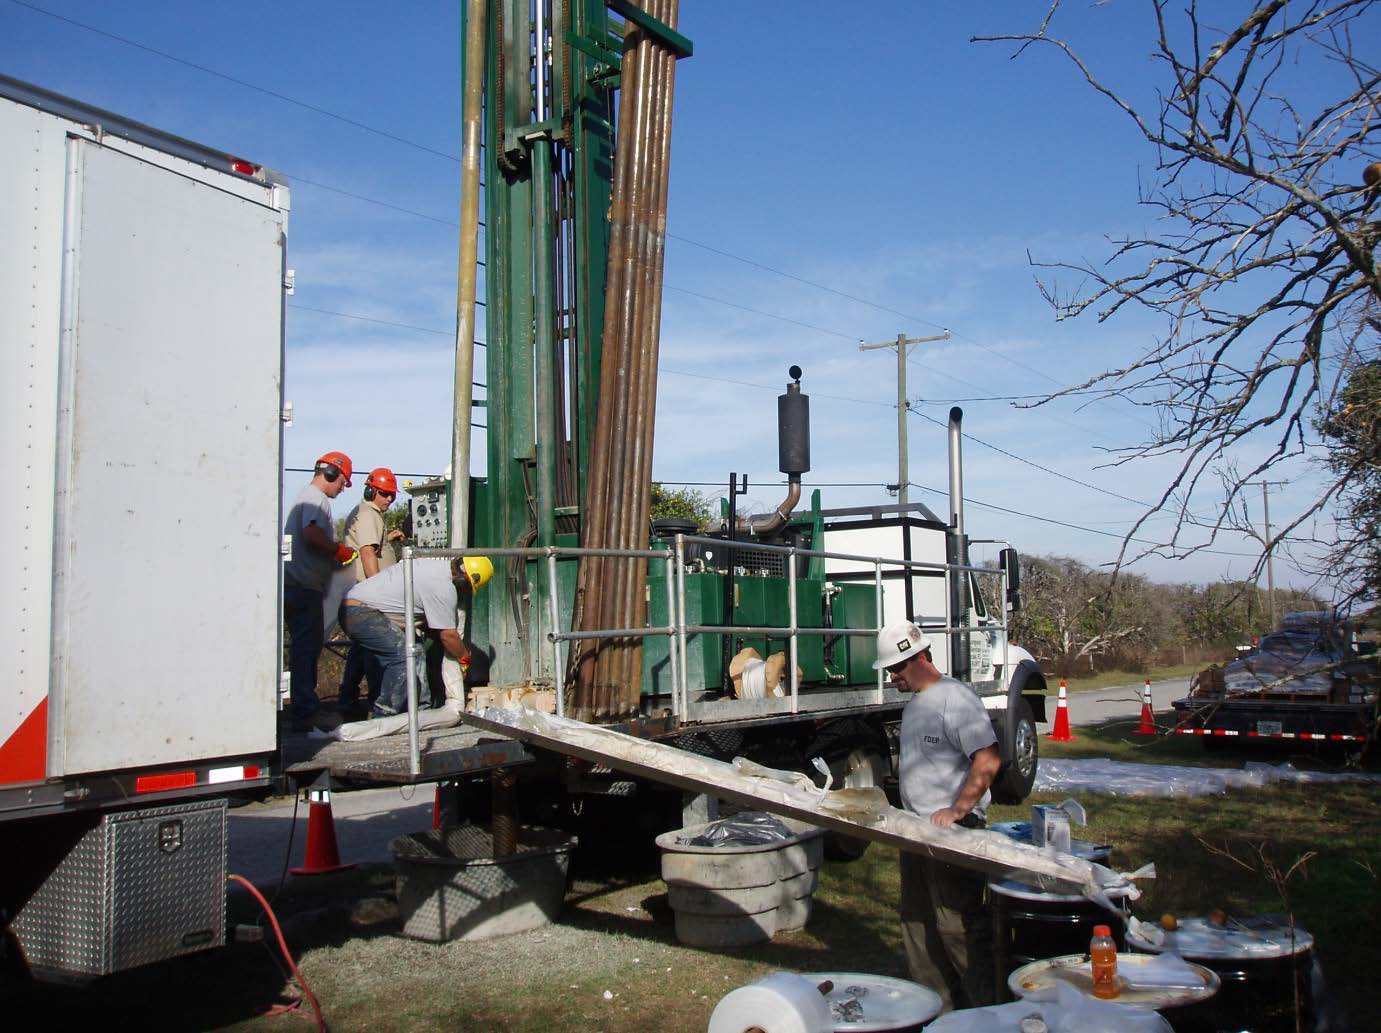 Evaluating lithologic cores collected by a rotosonic drill rig